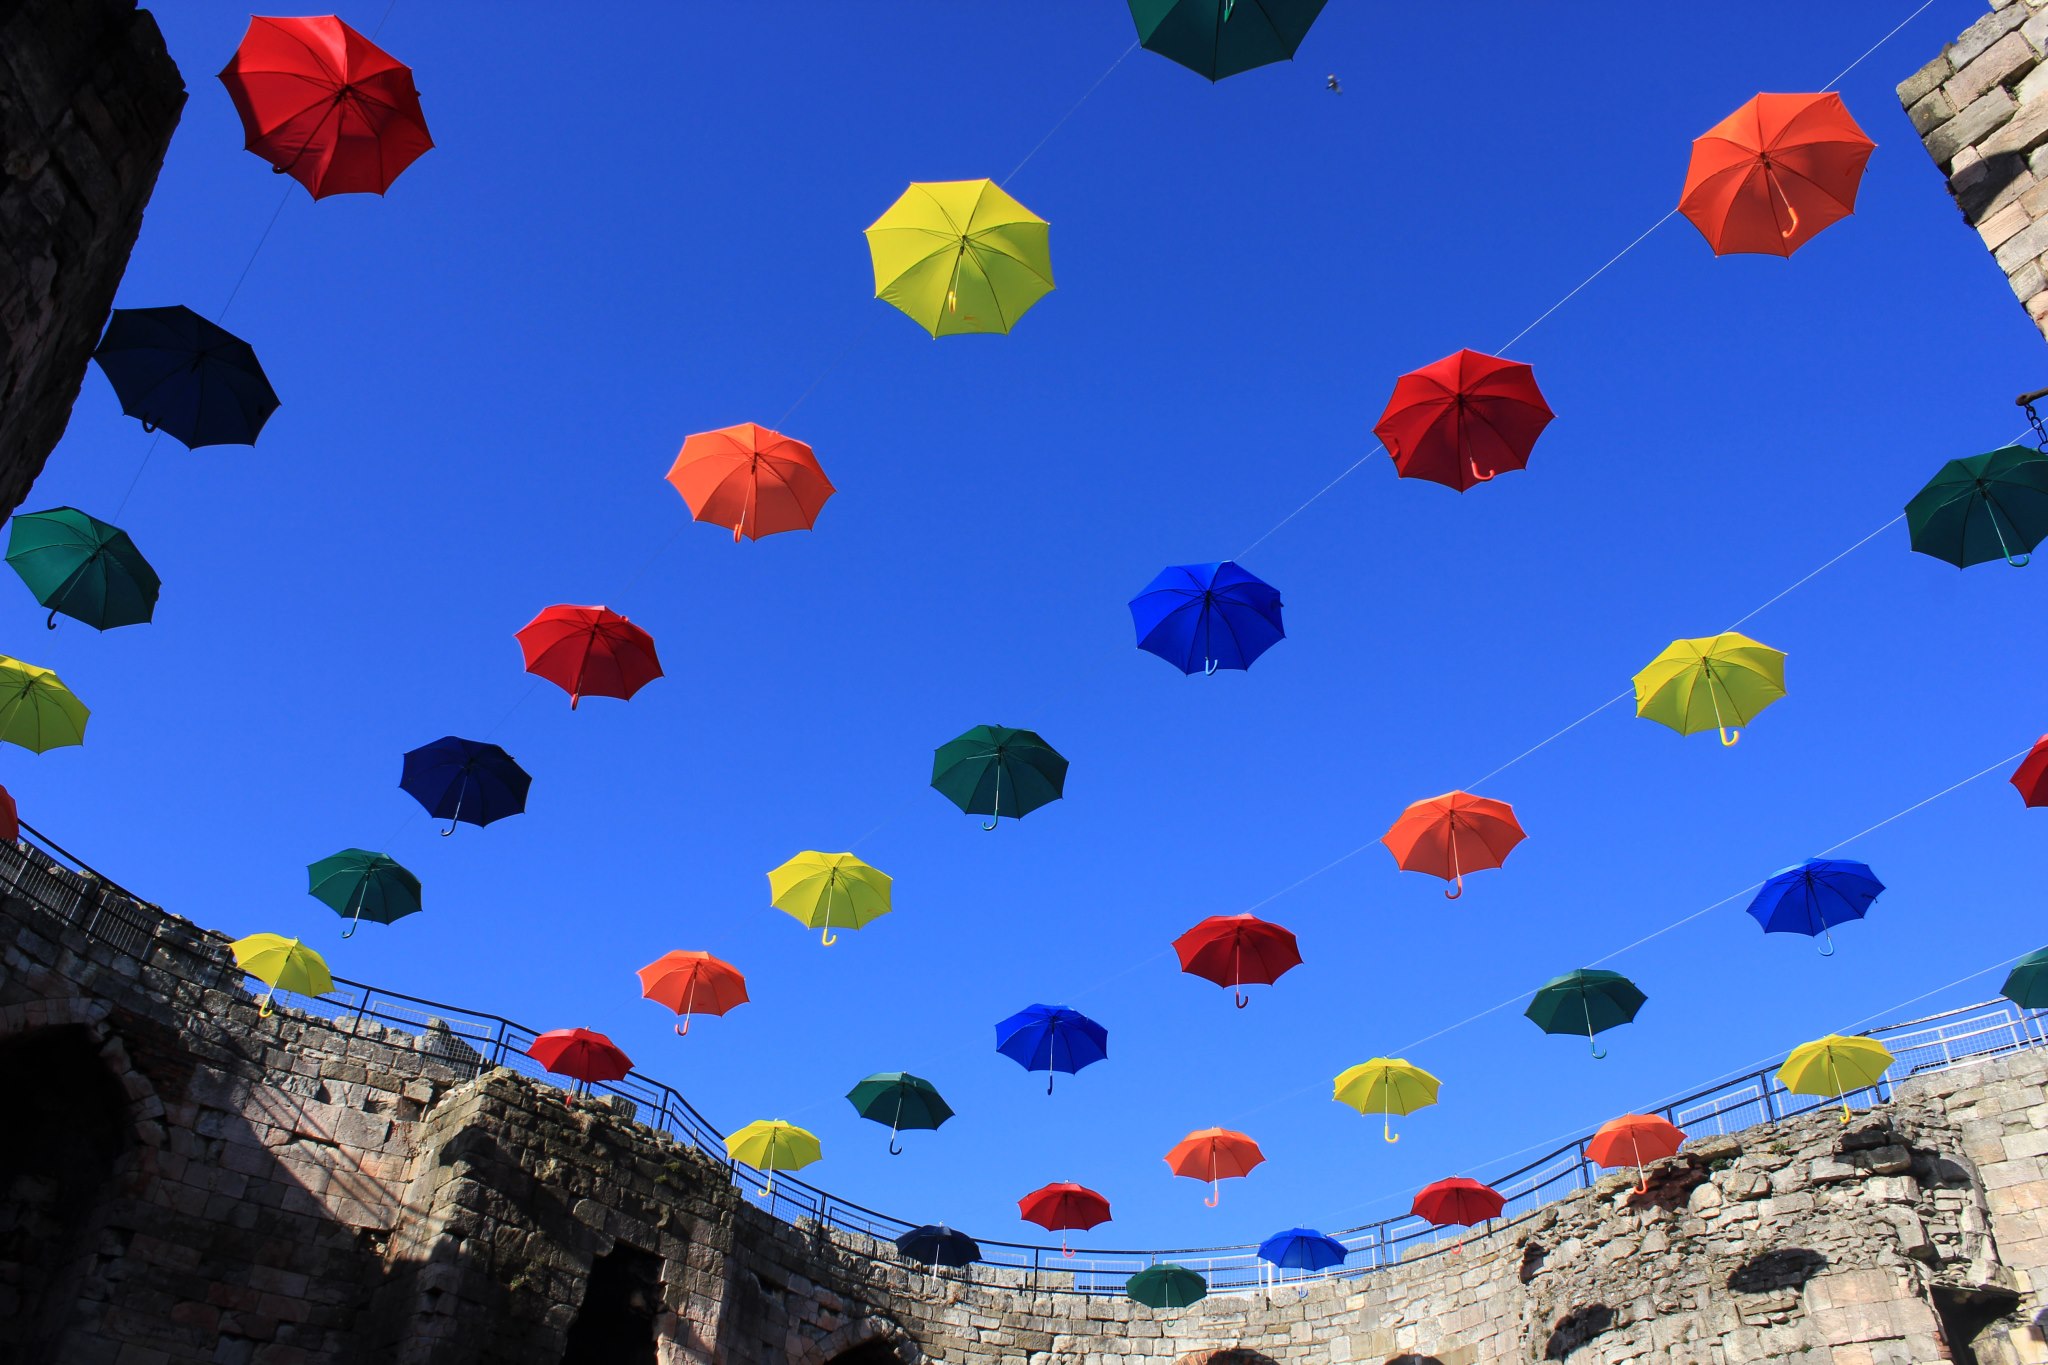 onomeister's Photo of the Day: “Umbrella Sky” | onomeister's bloggy!